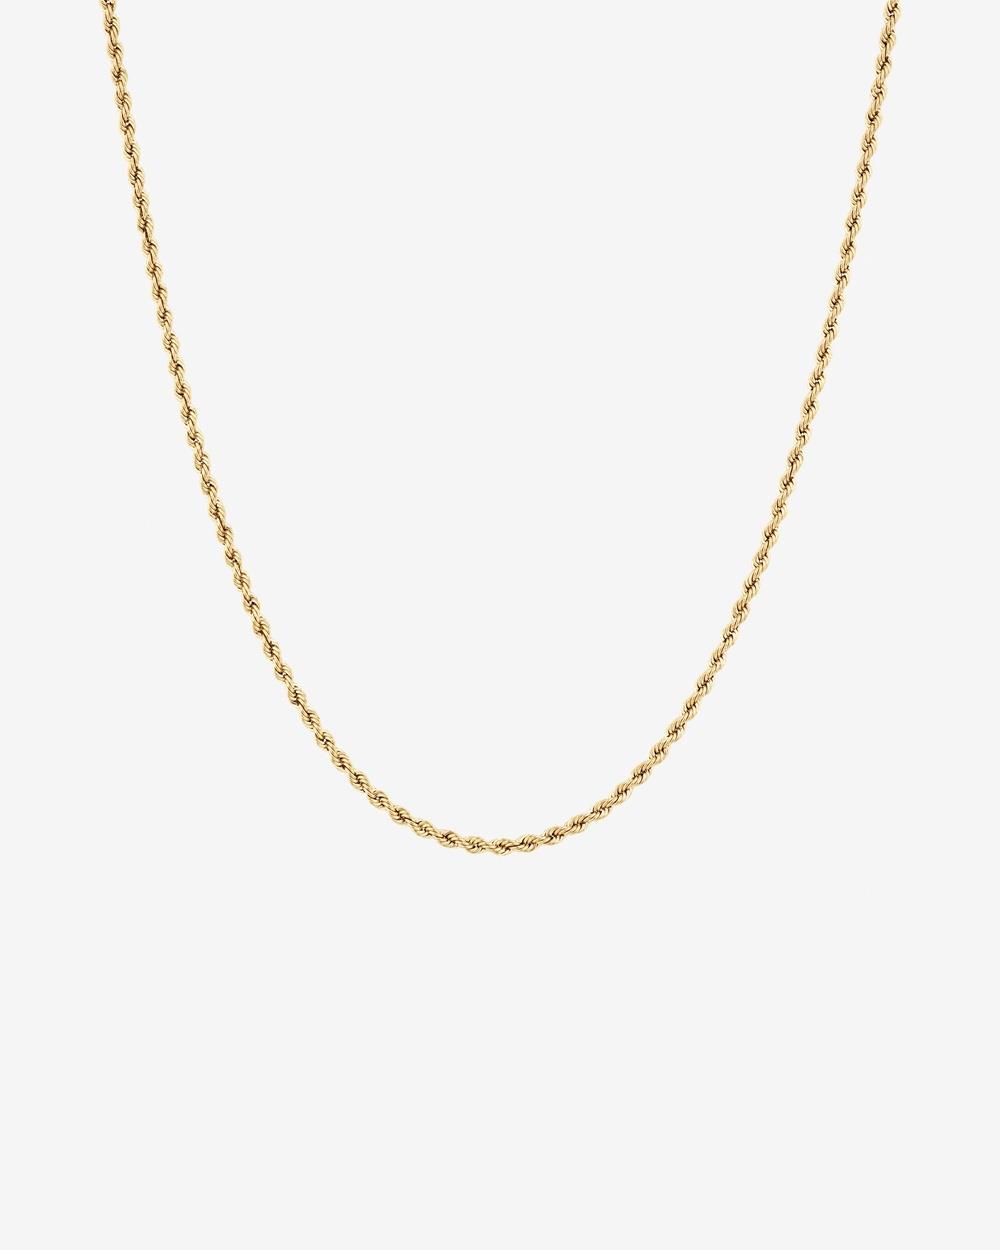 Michael Hill - 45cm Hollow Rope Chain in 10ct Yellow Gold - Jewellery (Yellow) 45cm Hollow Rope Chain in 10ct Yellow Gold